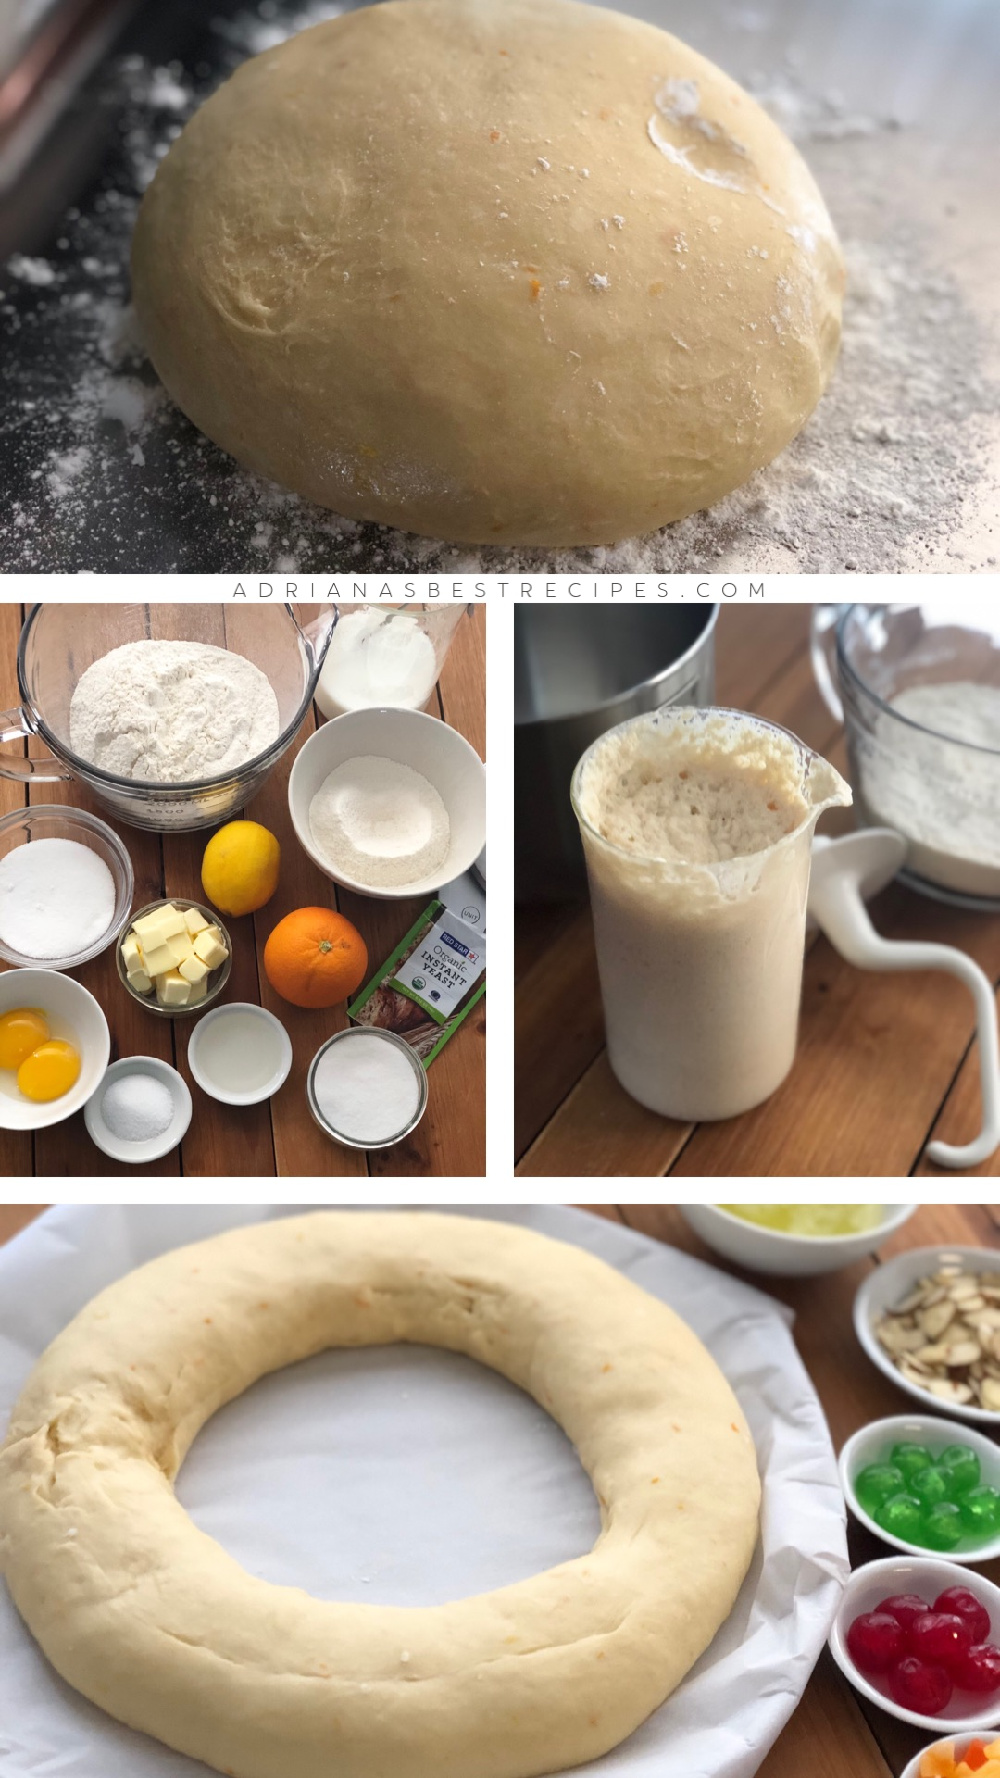 This is the process and the ingredients for the sweet bread which include good quality ingredients and instant yeast